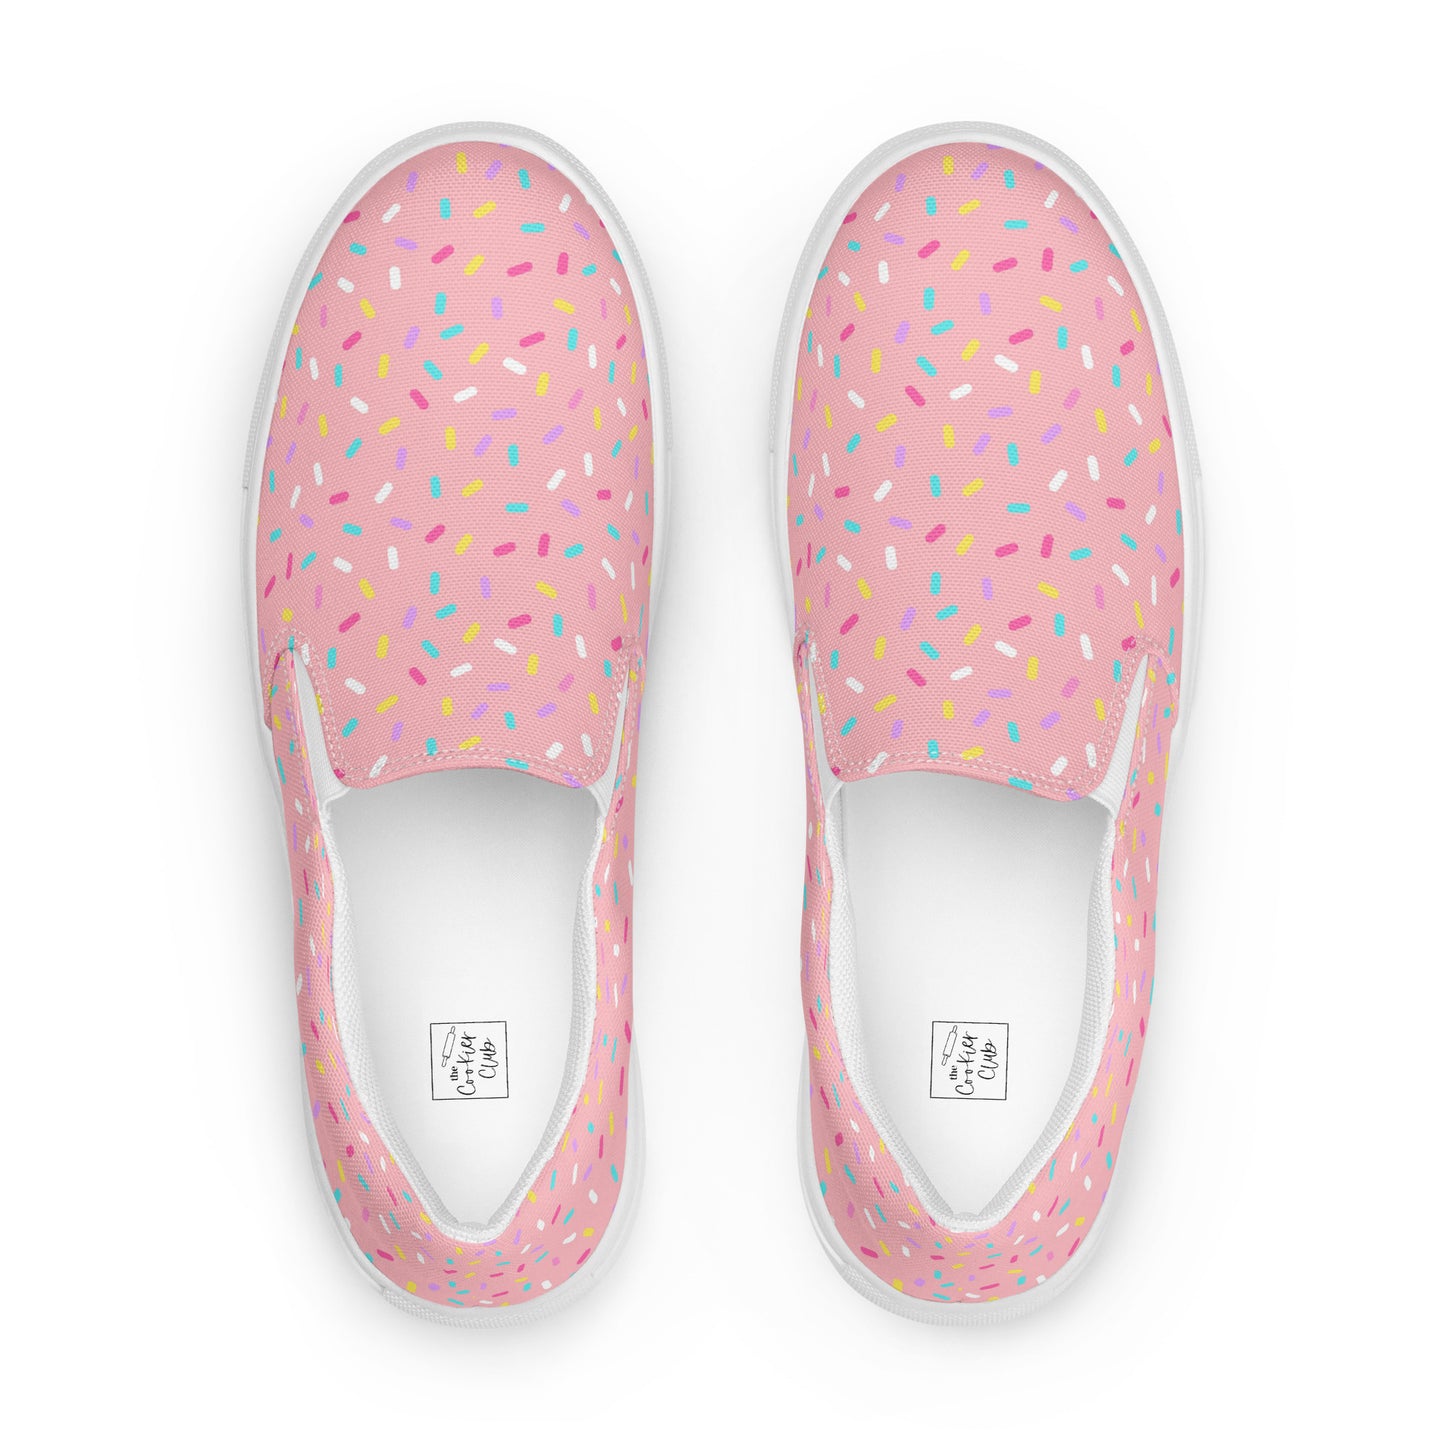 Sprinkled with Love - Women’s Slip-on Canvas Shoes in Pink